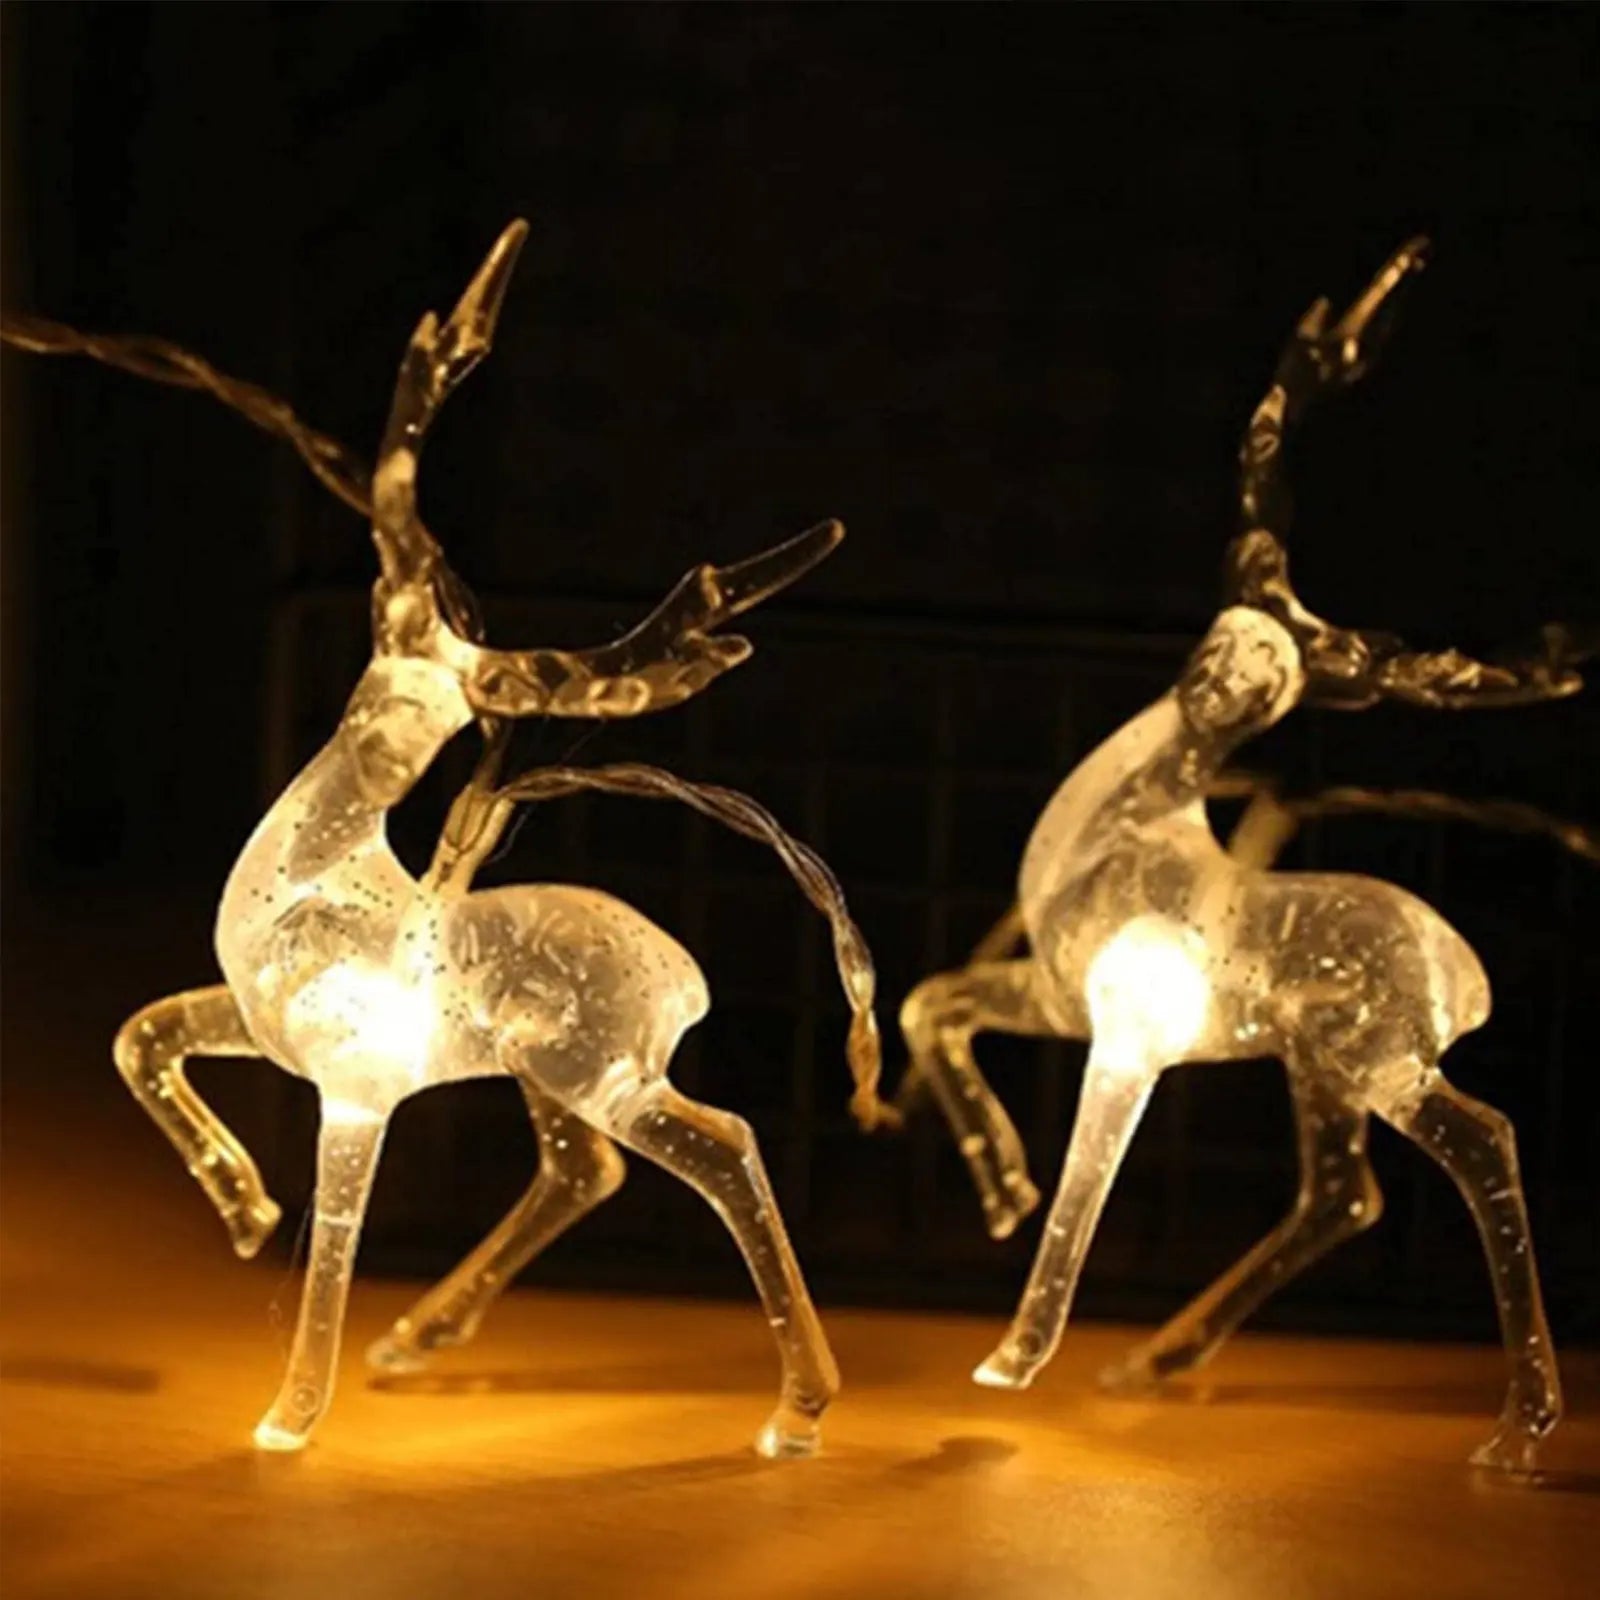 Deer Lighting Chain Battery Box Christmas elk Courtyard Decoration Small Colored Lights